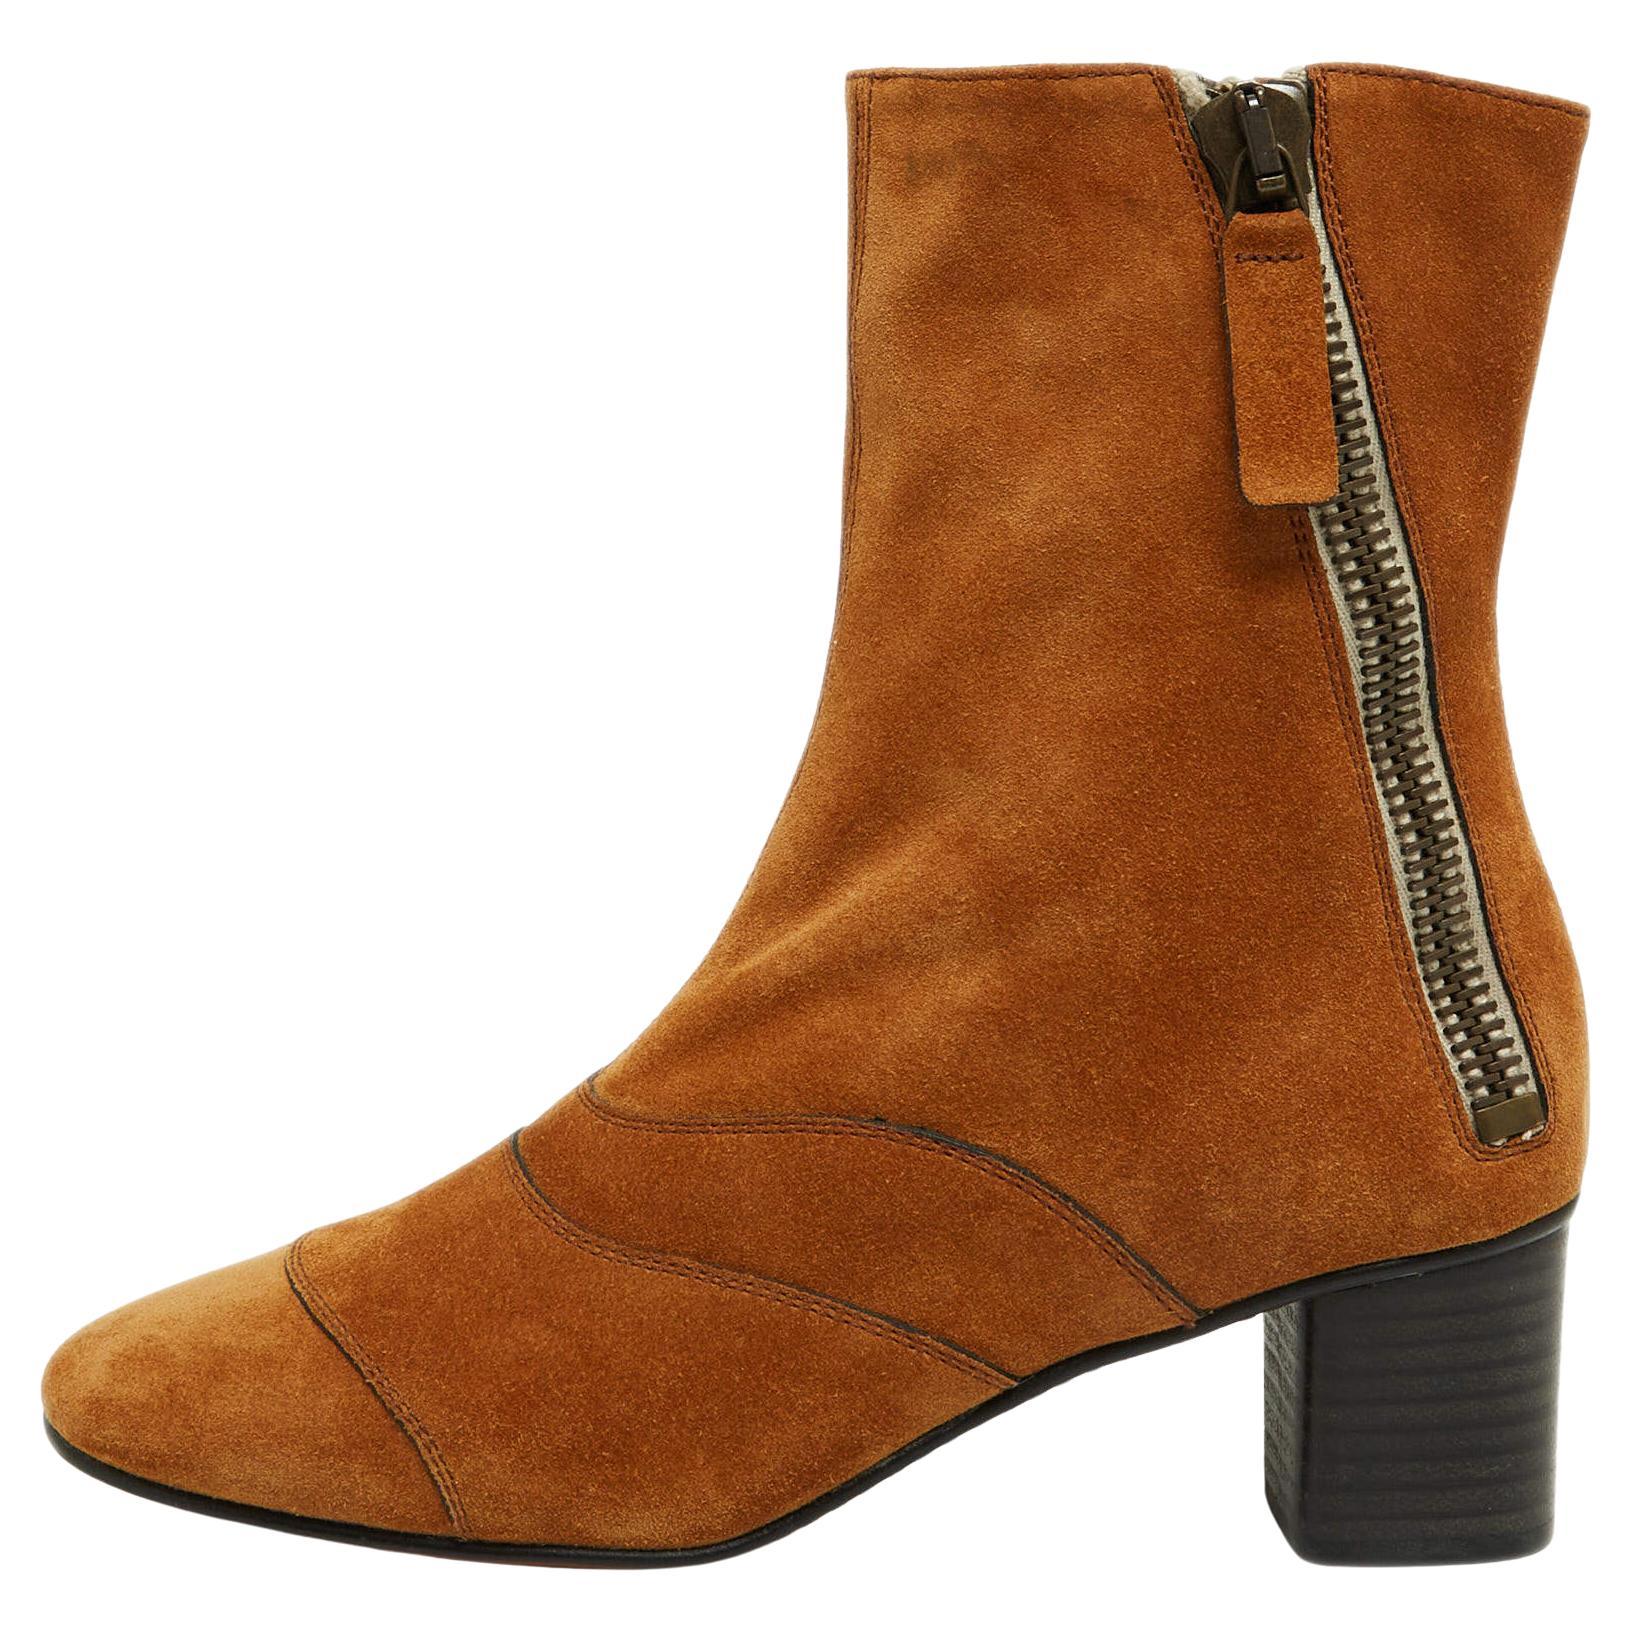 Chloe Brown Suede Ankle Boots Size 36